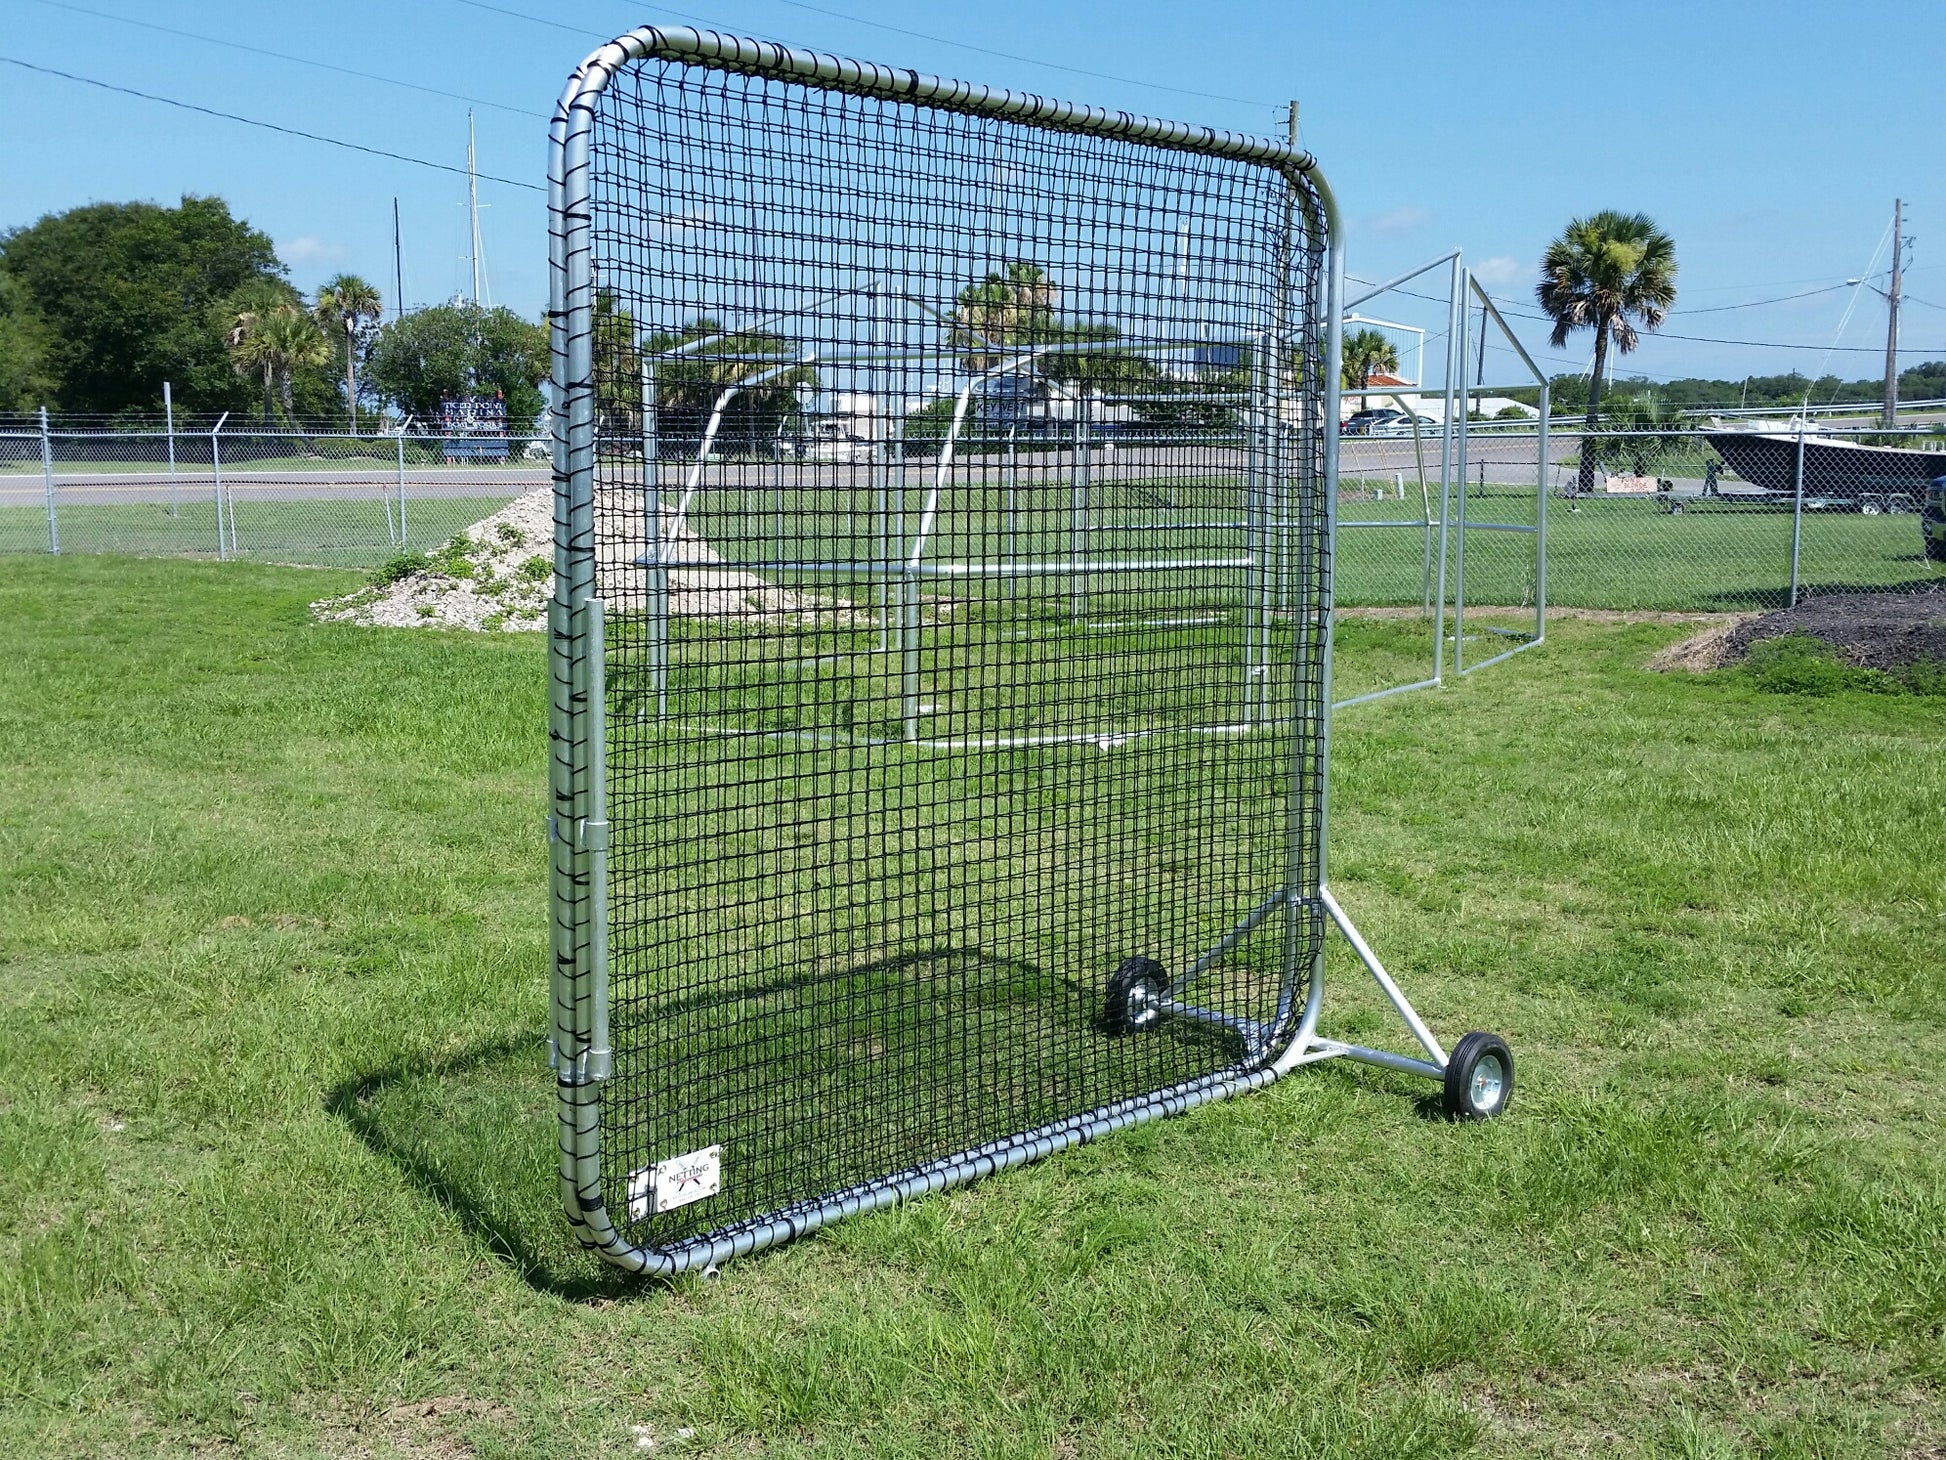 A baseball screen on wheels in the grass.